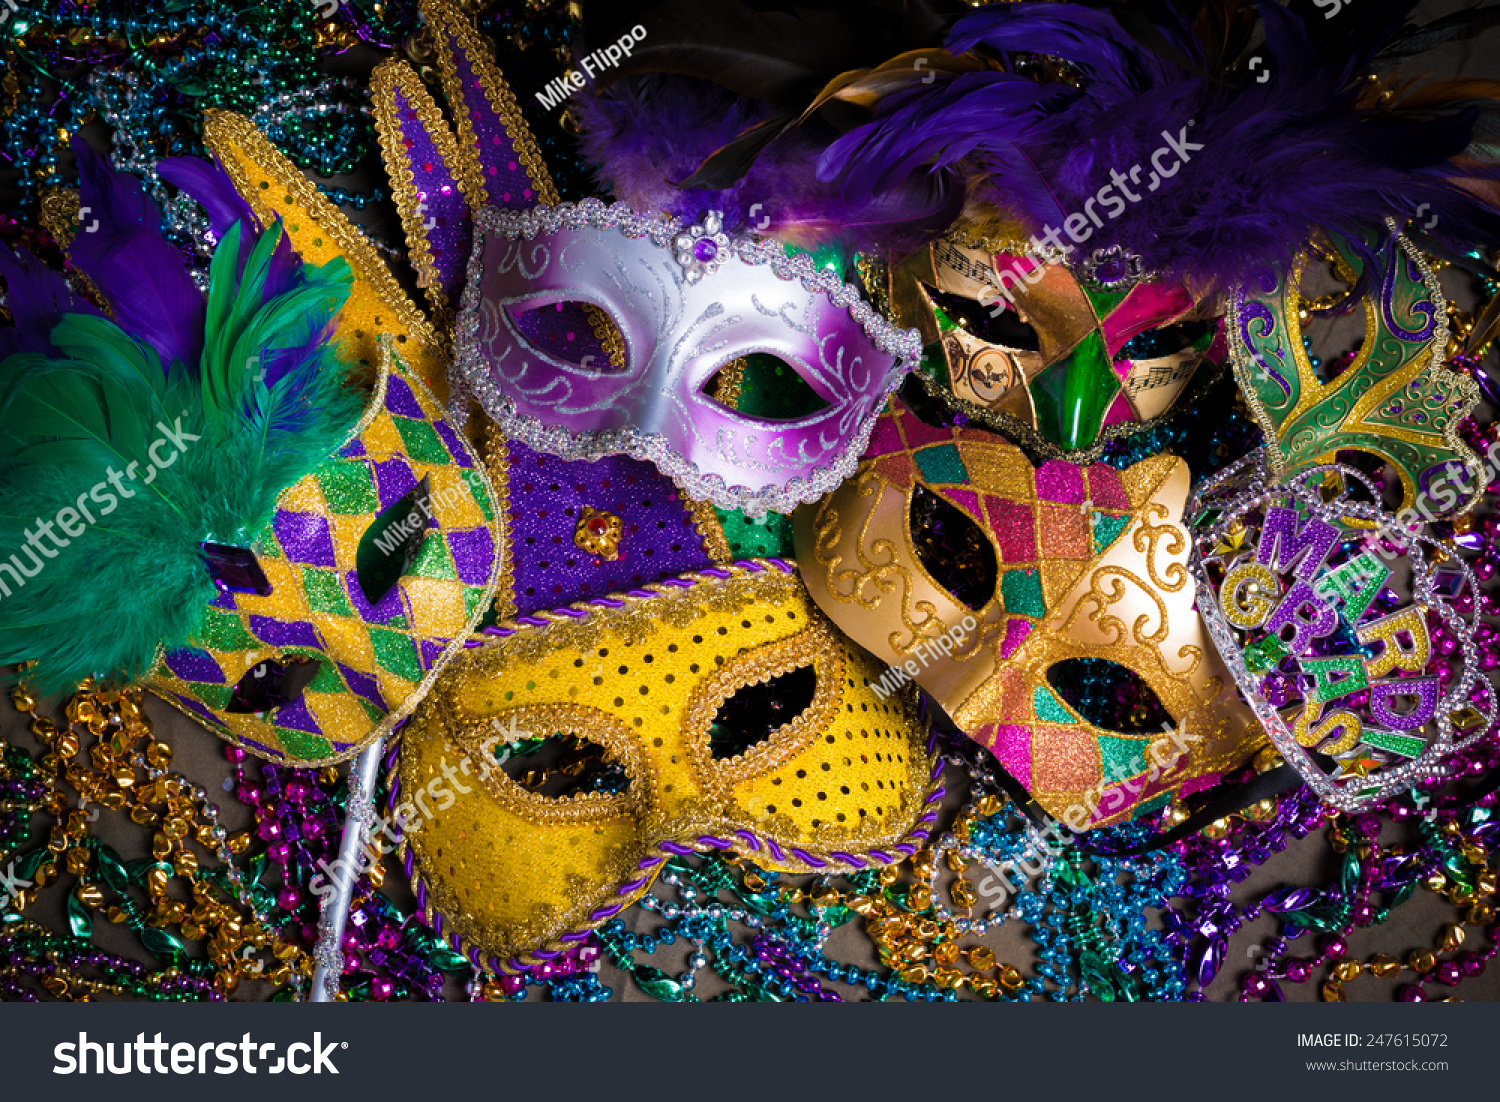 A group of venetian, mardi gras mask or disguise on a dark background #247615072